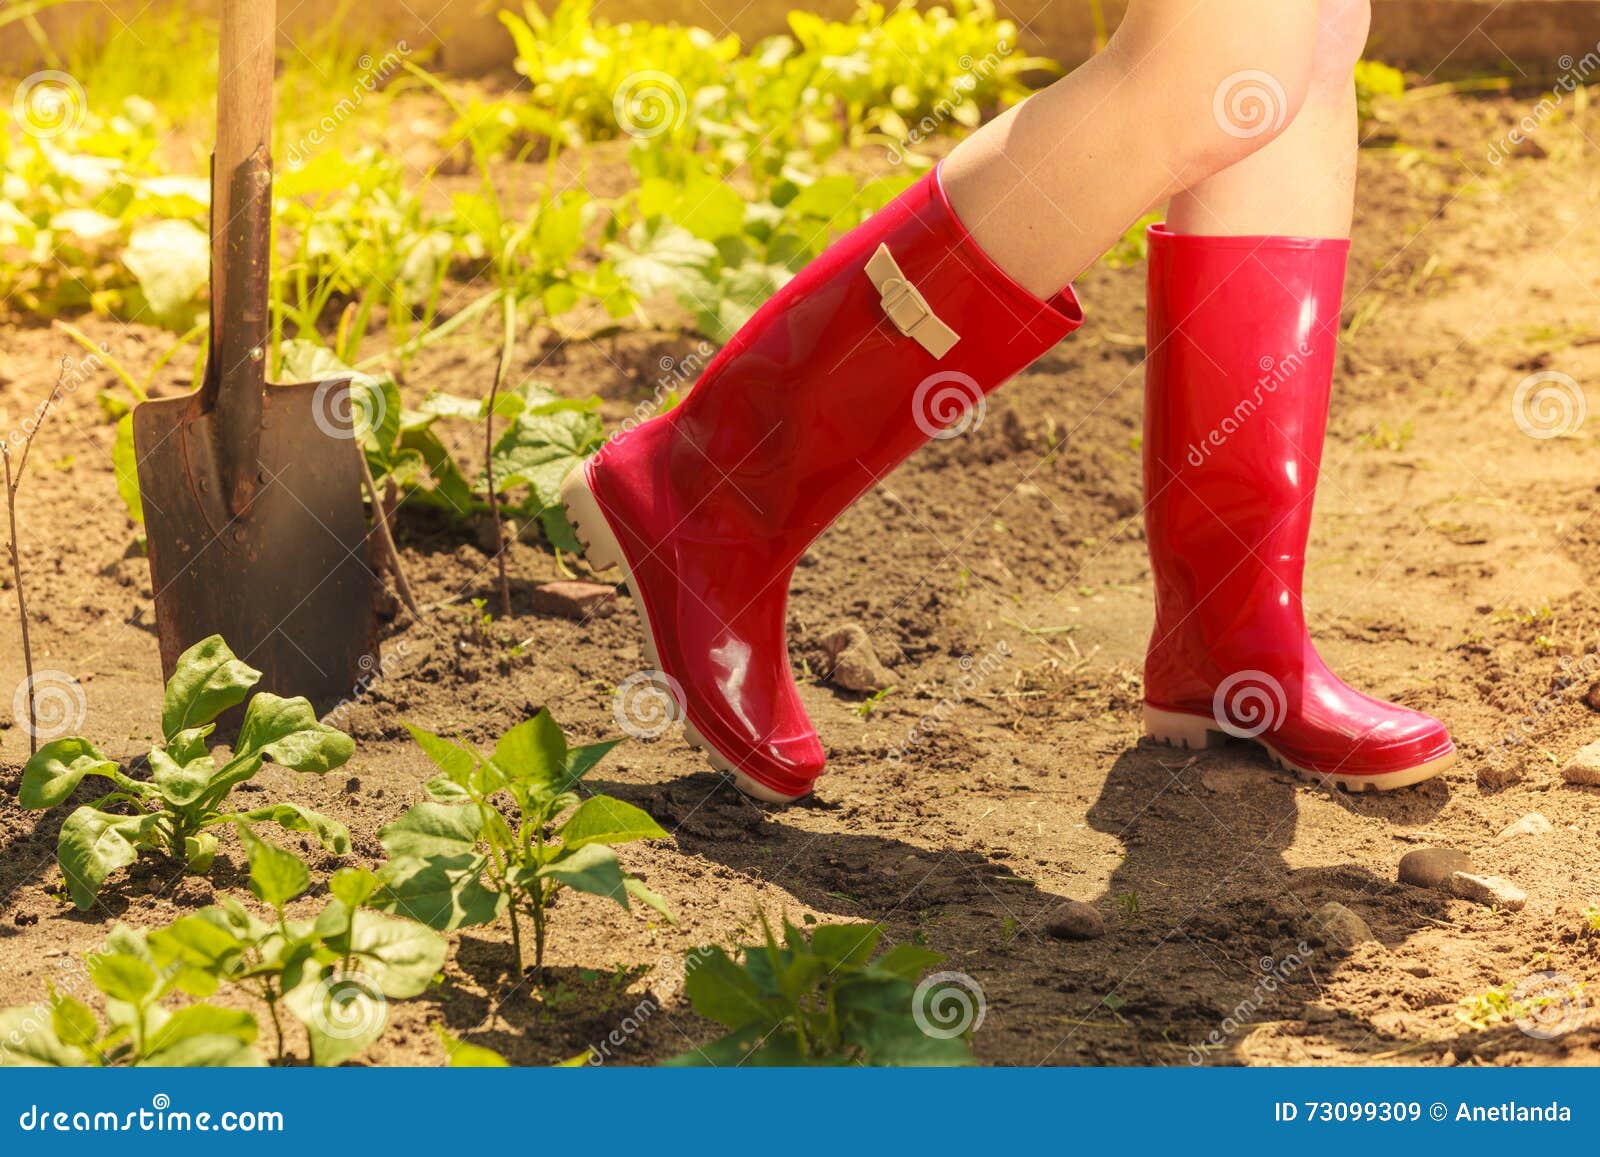 Woman Legs Wearing Red Rubber Boots in Garden Stock Image - Image of ...